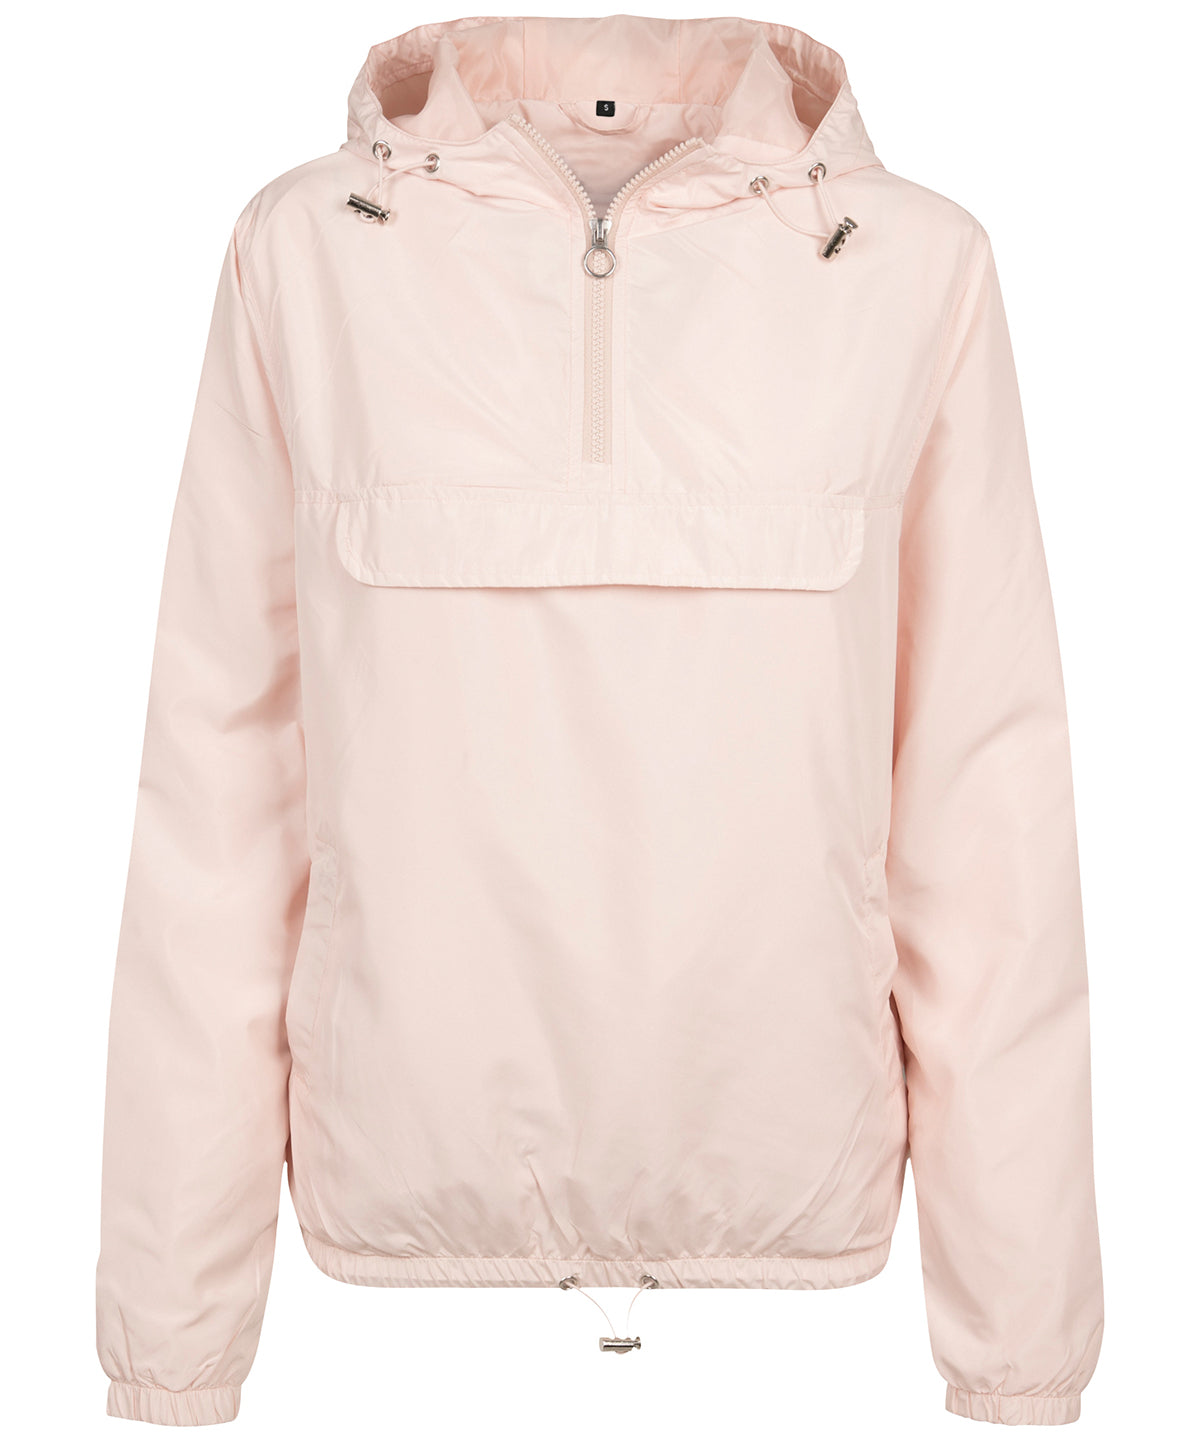 Build Your Brand Womens Basic Pullover Jacket